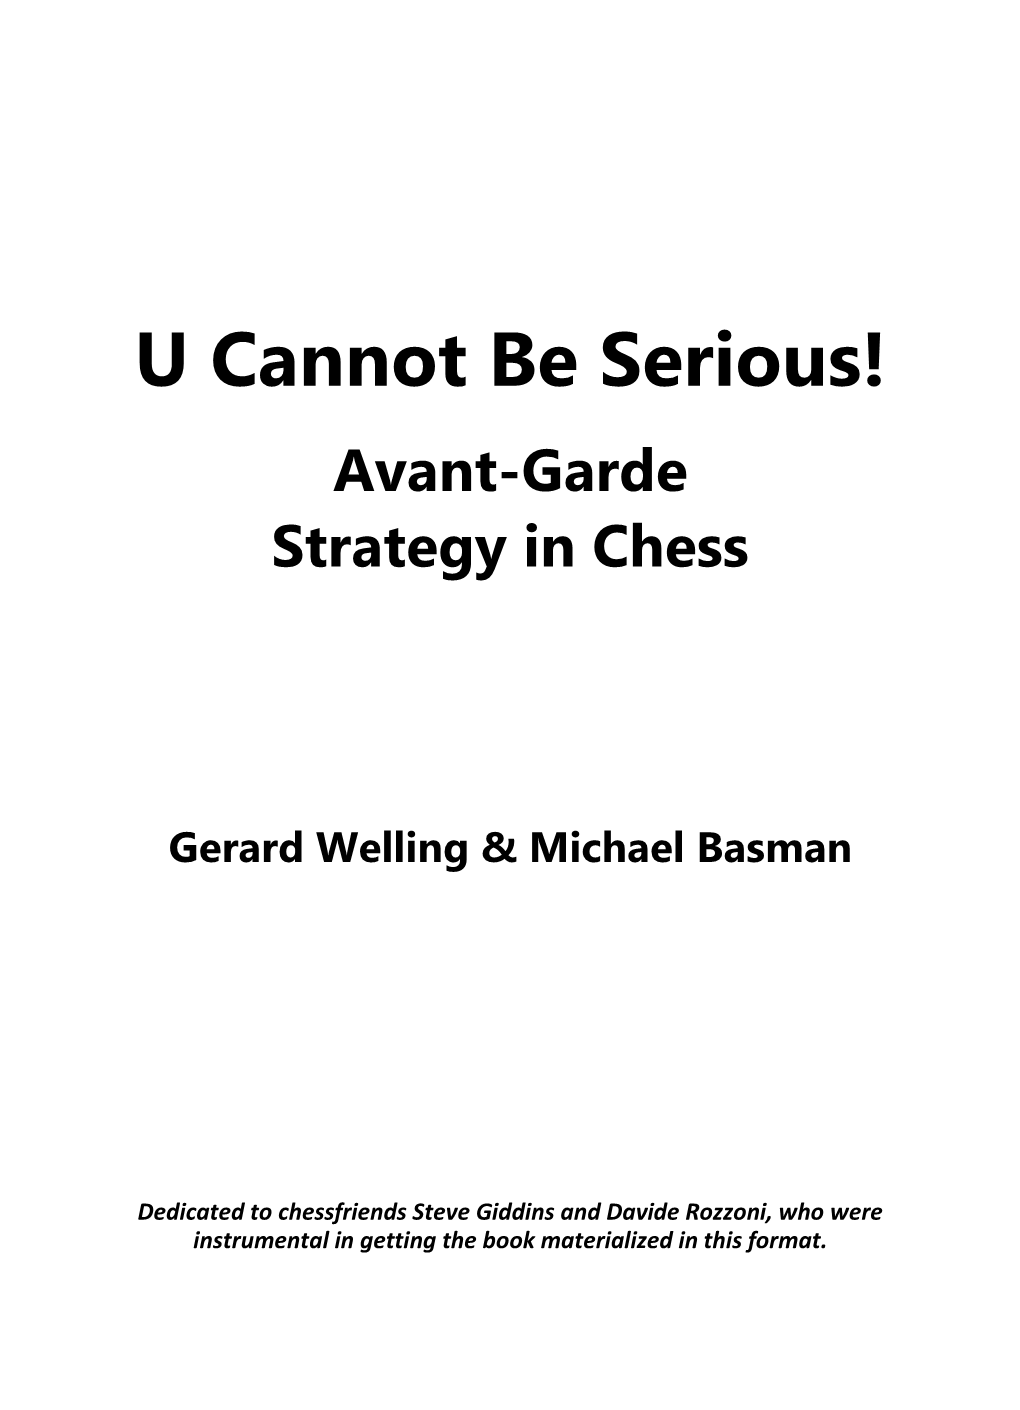 U Cannot Be Serious! Avant-Garde Strategy in Chess